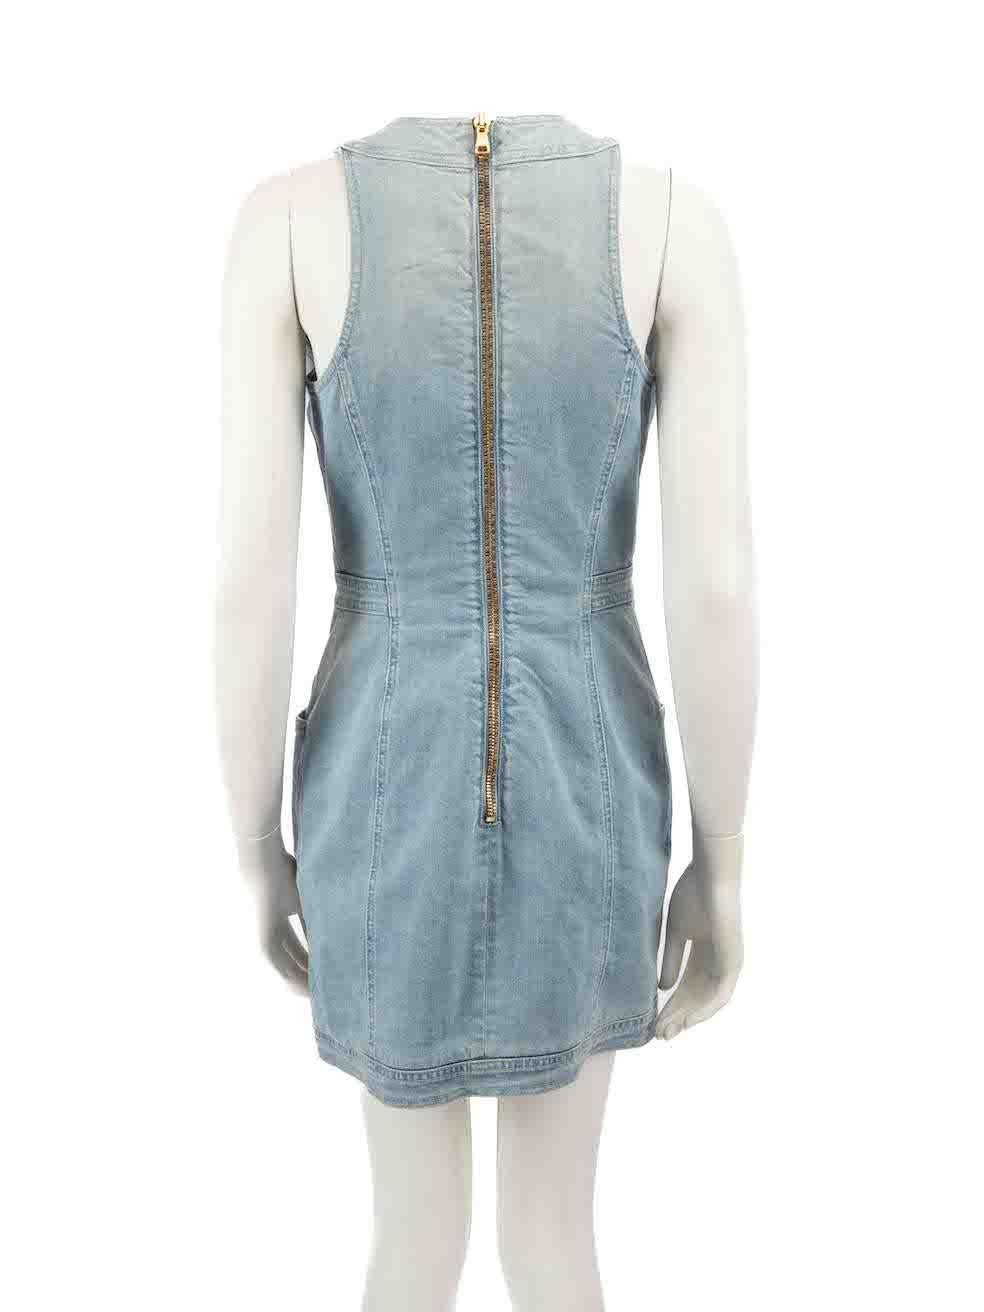 Balmain Blue Buttoned Lace Up Denim Mini Dress Size L In Excellent Condition For Sale In London, GB